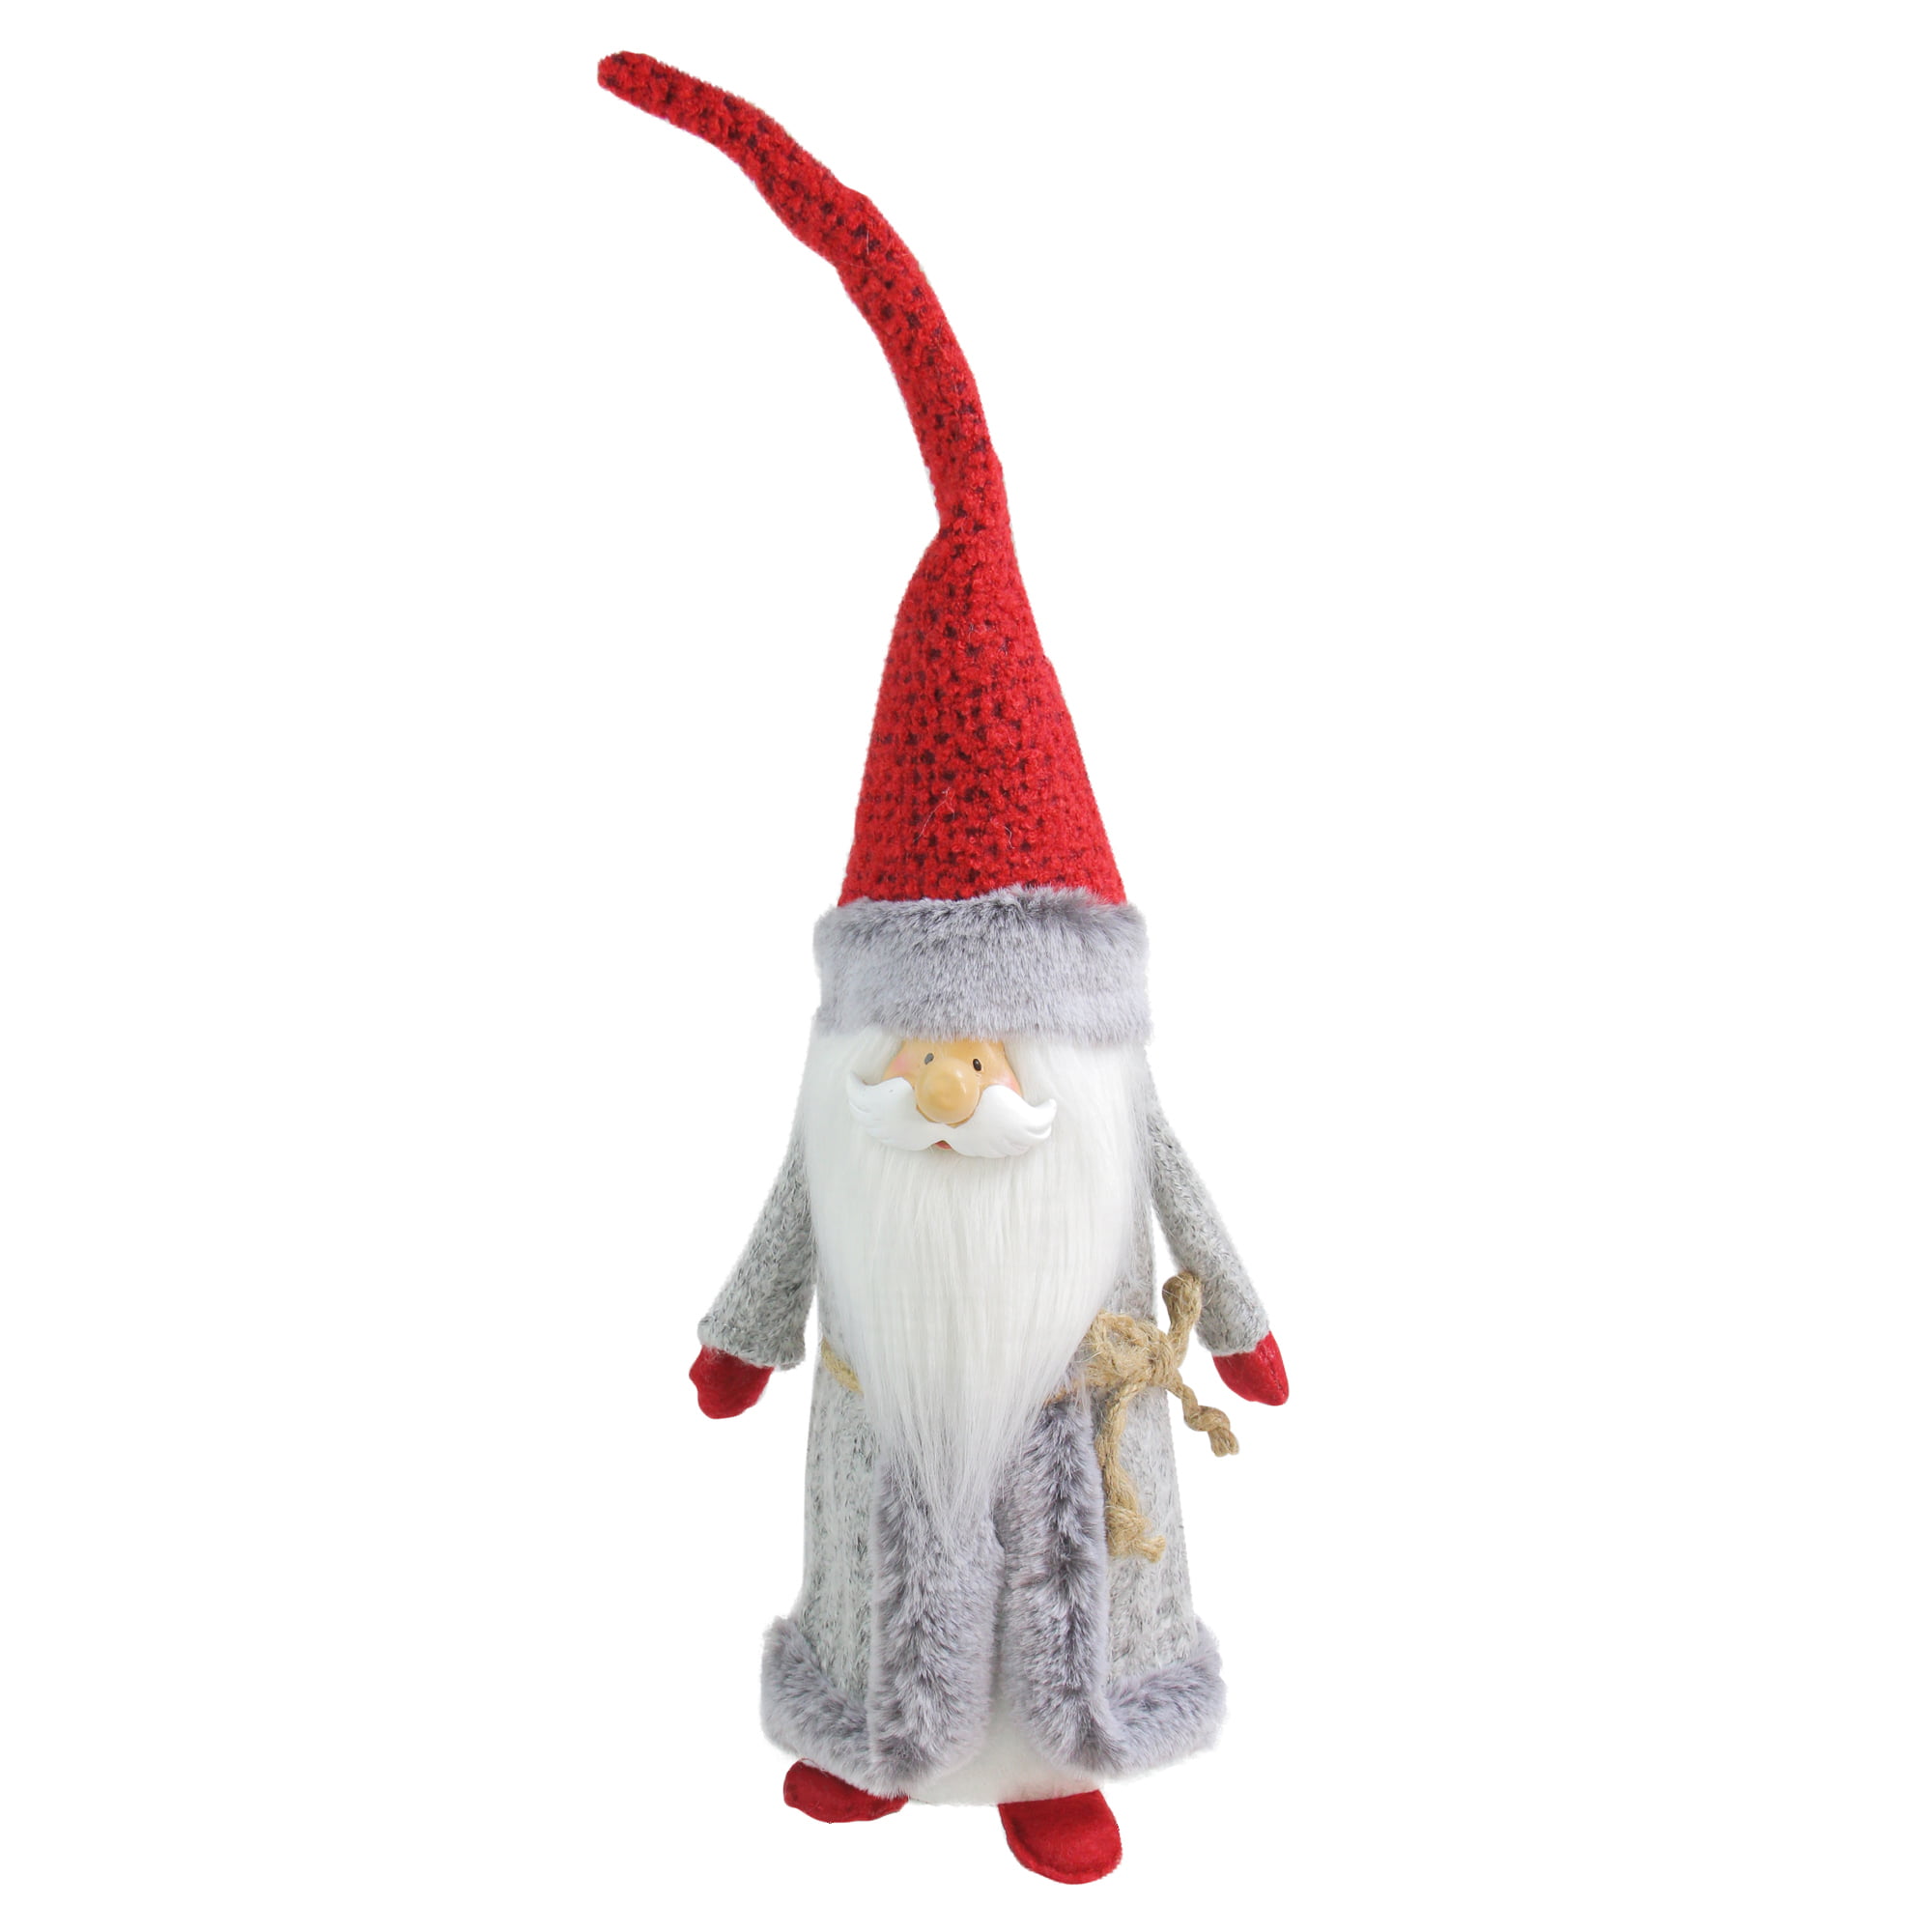 Christmas Timber Standing Santa Gnome Figurine 13 Inches Tall 